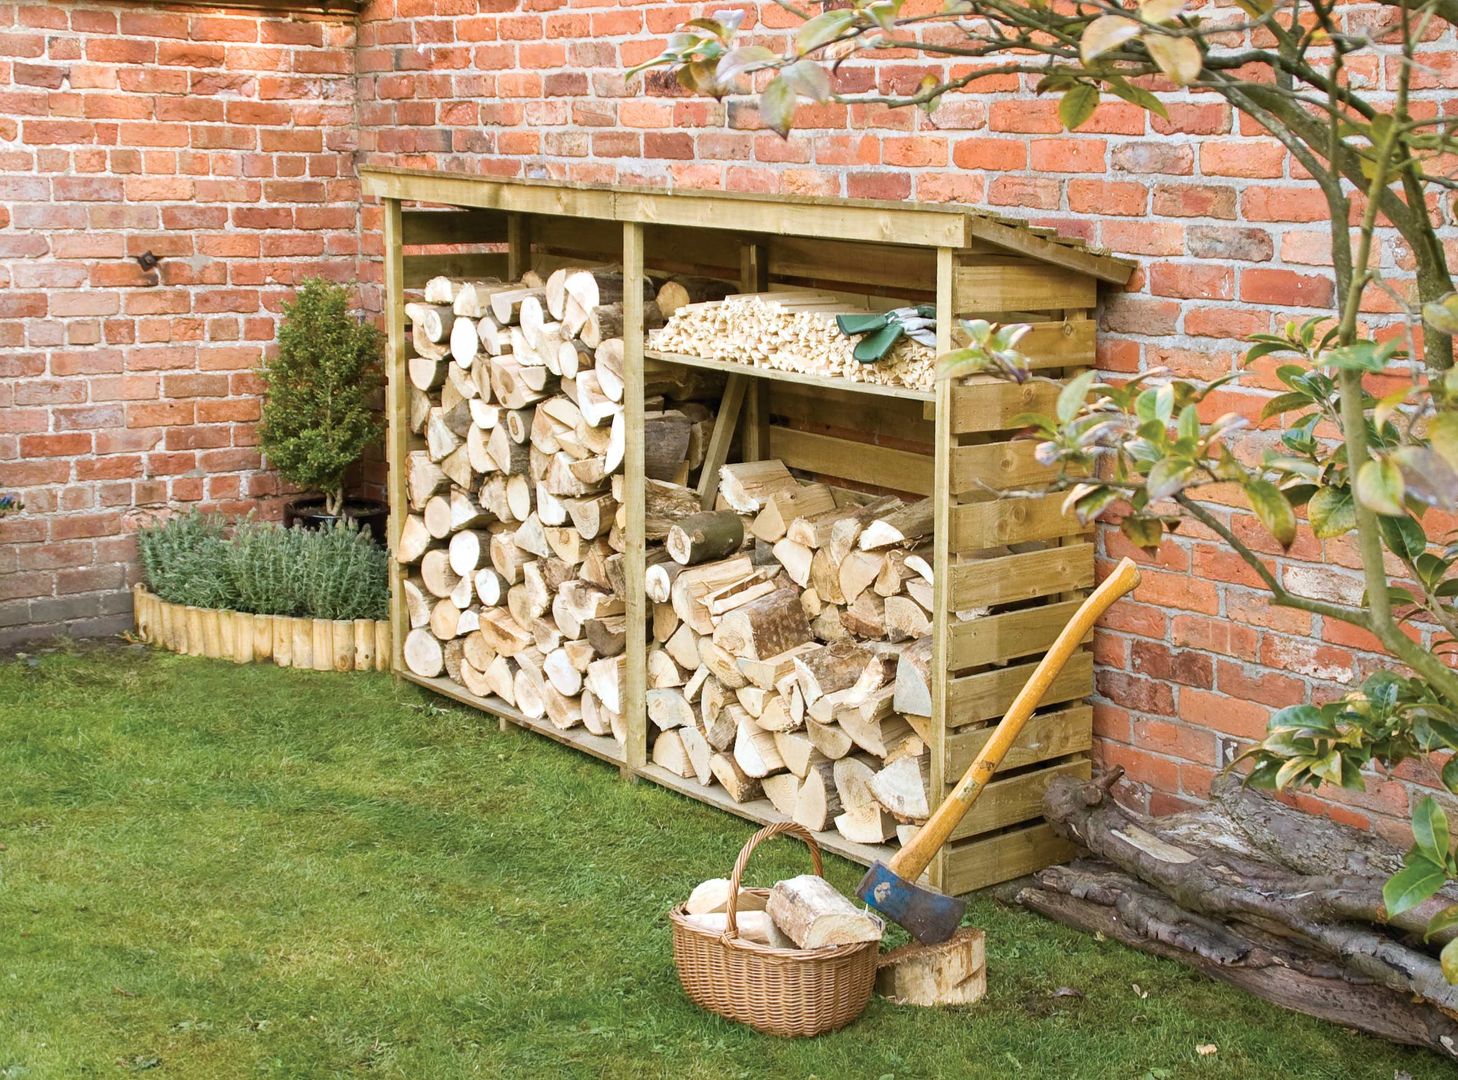 Landscaping and Garden Storage, Heritage Gardens UK Online Garden Centre Heritage Gardens UK Online Garden Centre クラシカルな 庭 家具